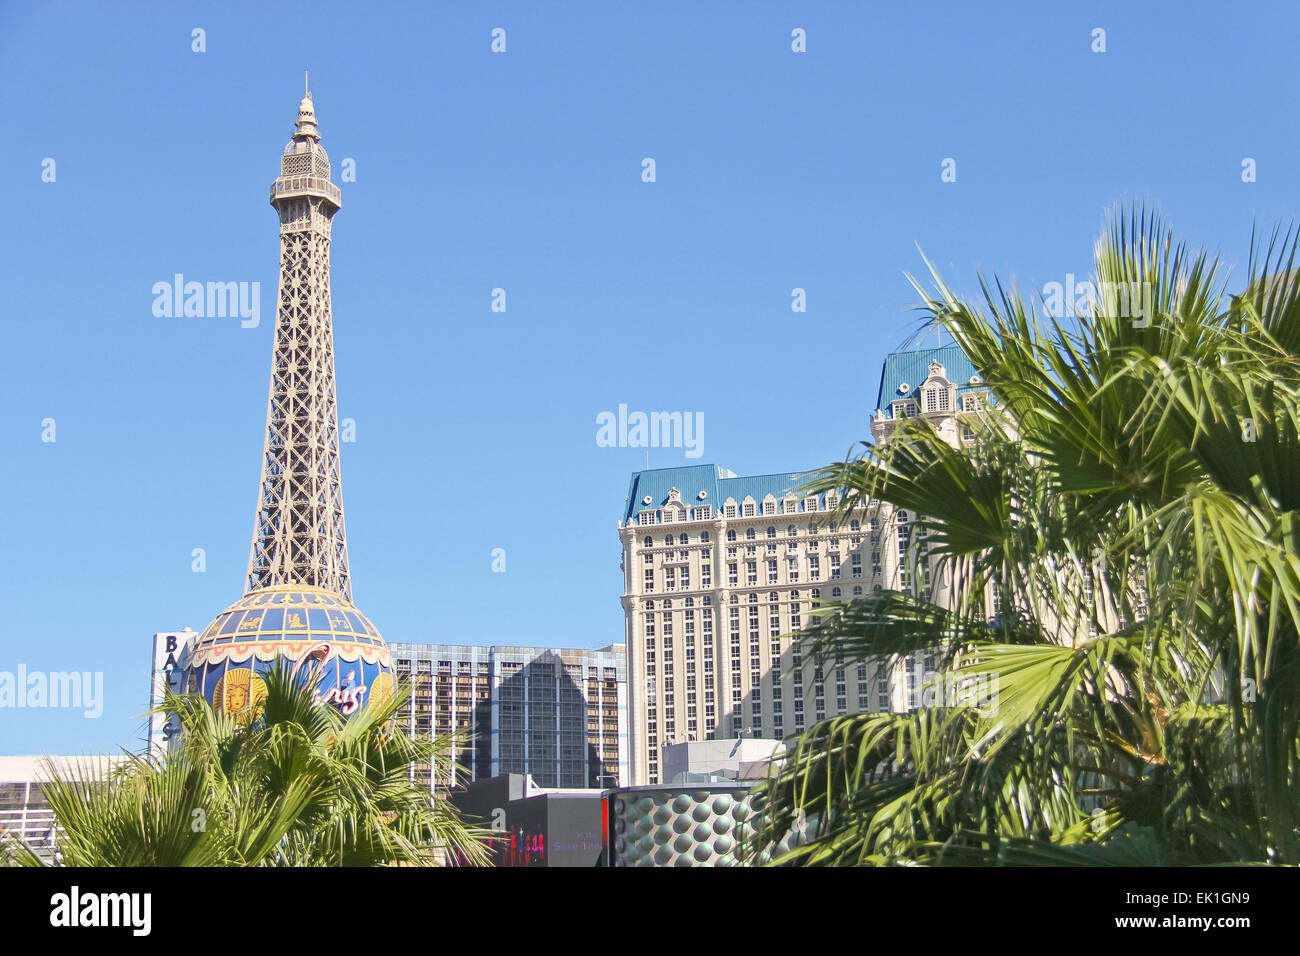 Eiffel Tower in Las Vegas in a Summer Day Editorial Stock Image - Image of  tower, gamblers: 33316399